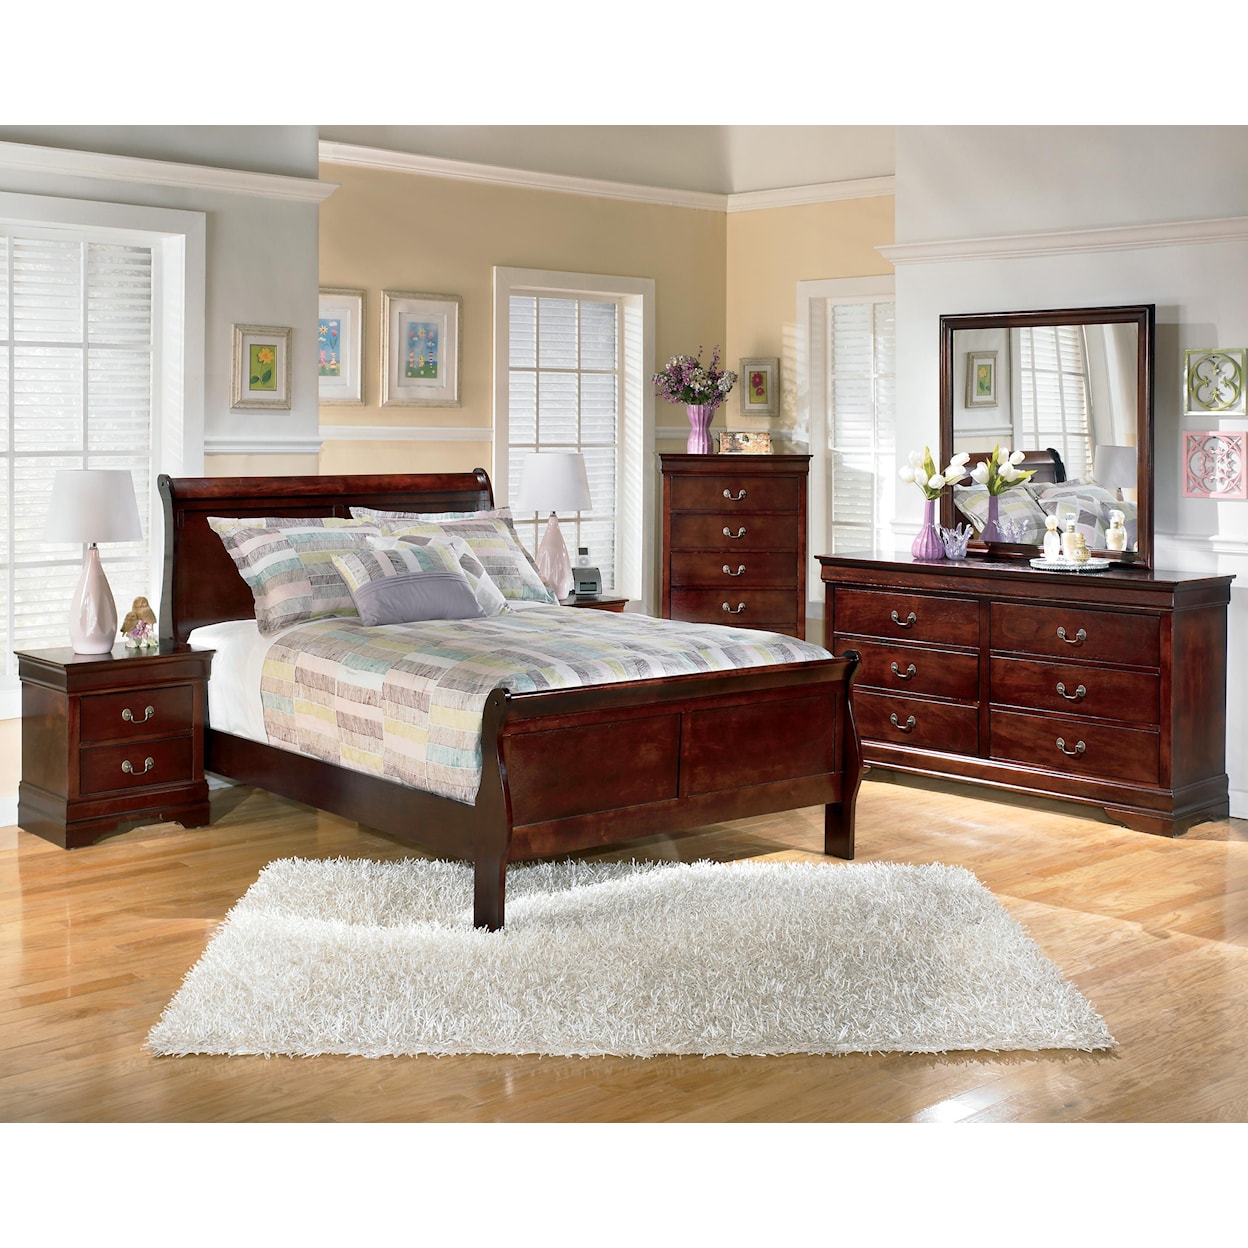 Signature Design by Ashley Alisdair 5pc Full Bedroom Group